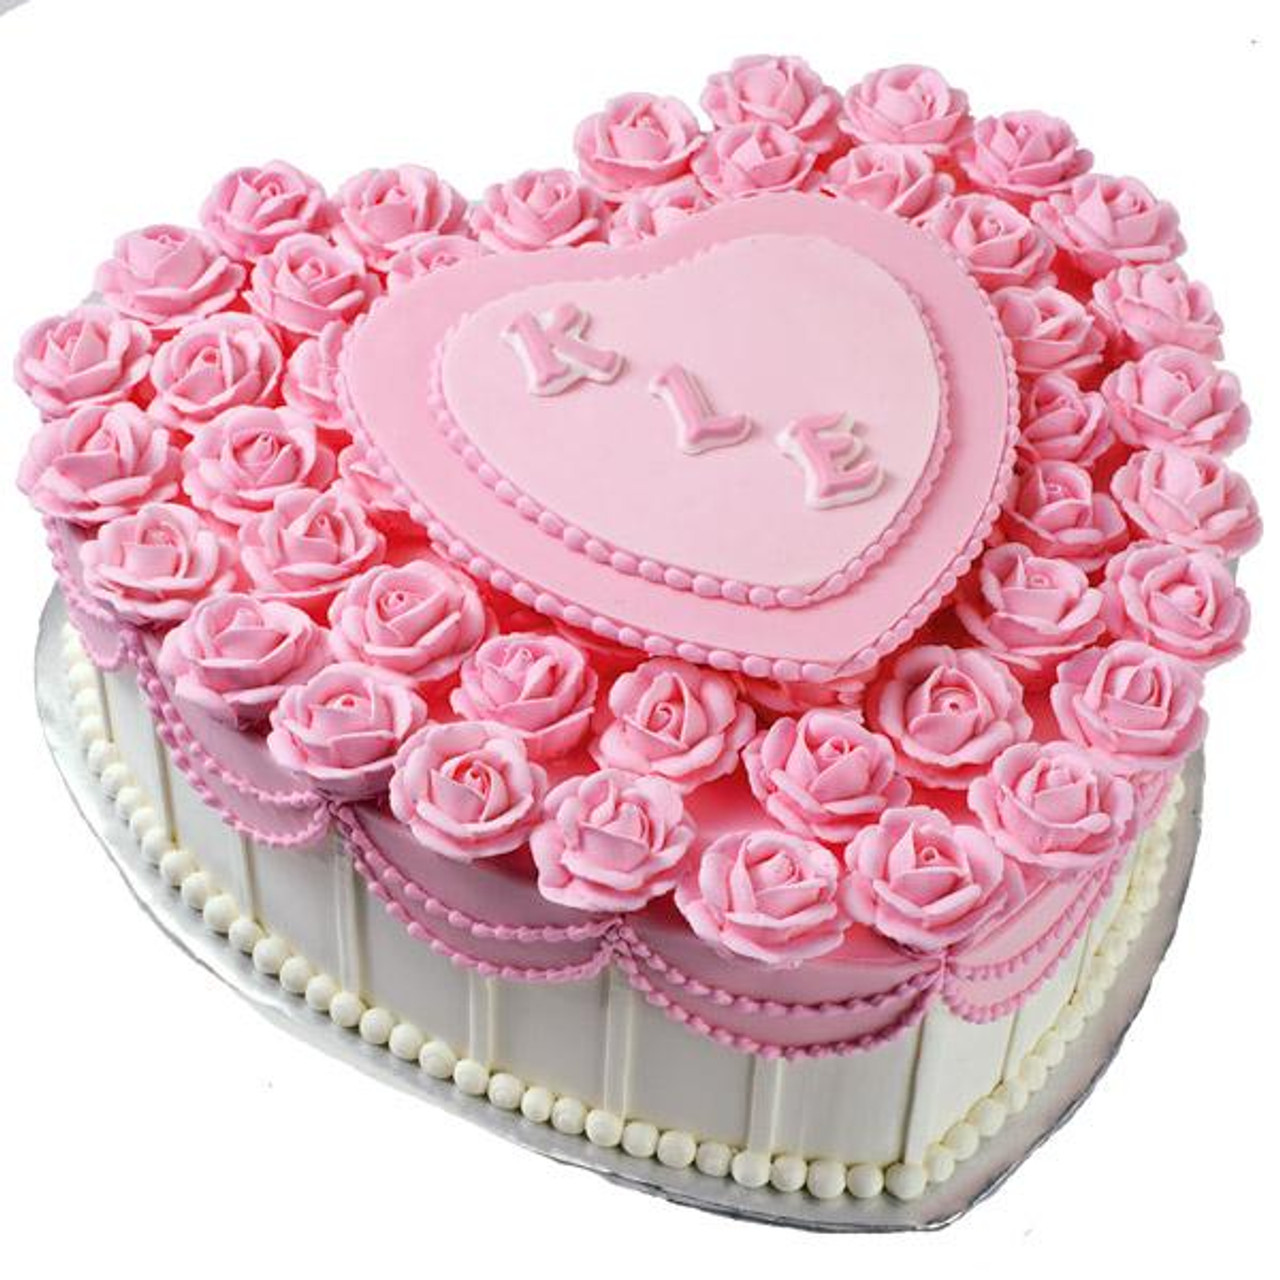 https://cdn11.bigcommerce.com/s-w8h1g5/images/stencil/1280x1280/products/8480/19639/loves_a_bed_of_roses_cake_large__33390.1480298117.jpg?c=2